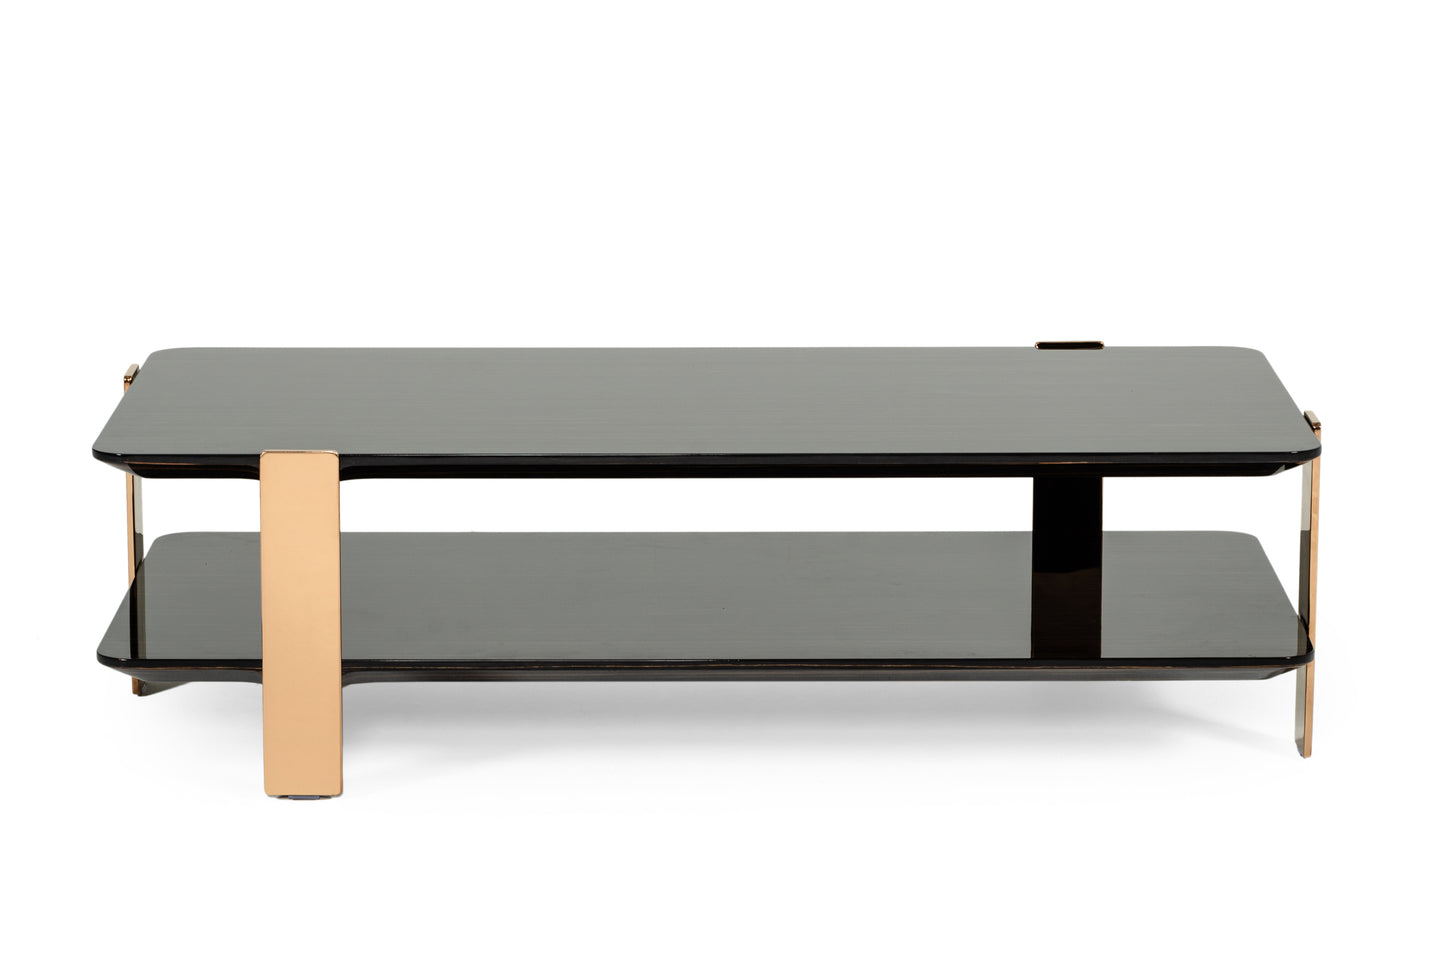 Leroy Modern Ebony & Rosegold Coffee Table with Stainless Steel Base